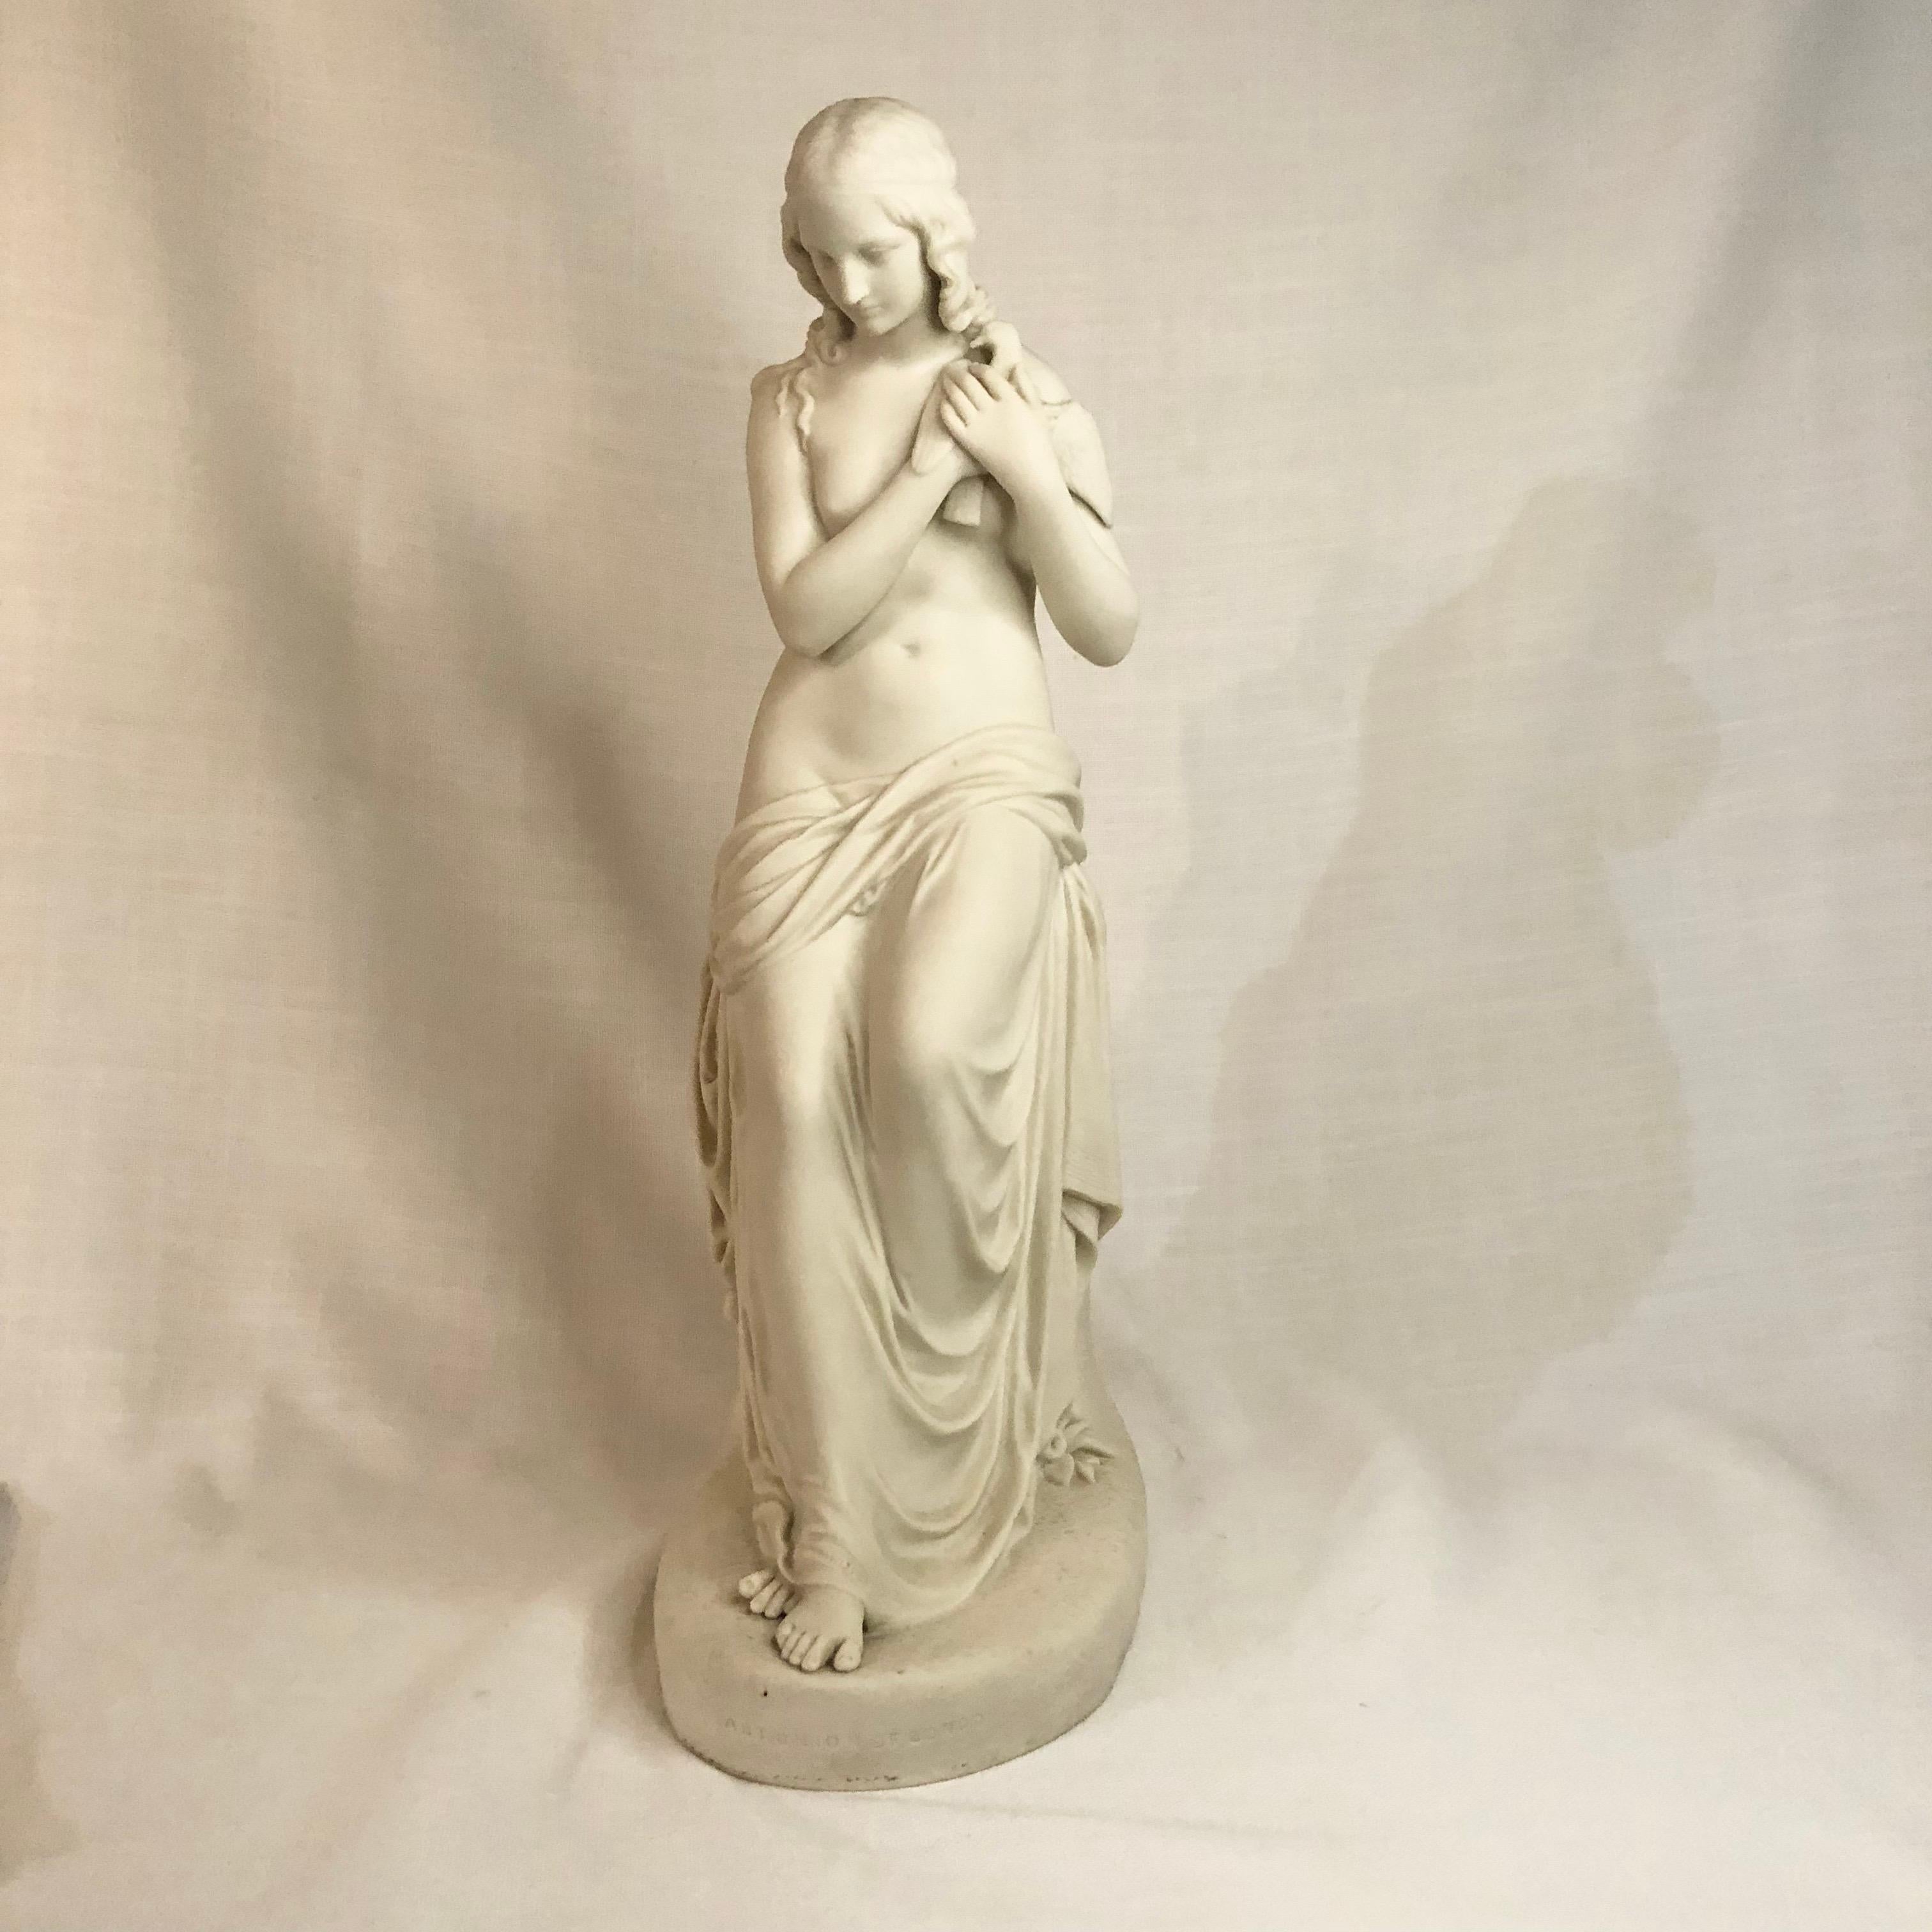 I want to offer you this gorgeous parian figure named Innocence. She is a beautiful semi-nude figure with draping fabric on the lower part of her body. She is holding a dove against her chest. The dove represents virtue. The modeler made Innocence